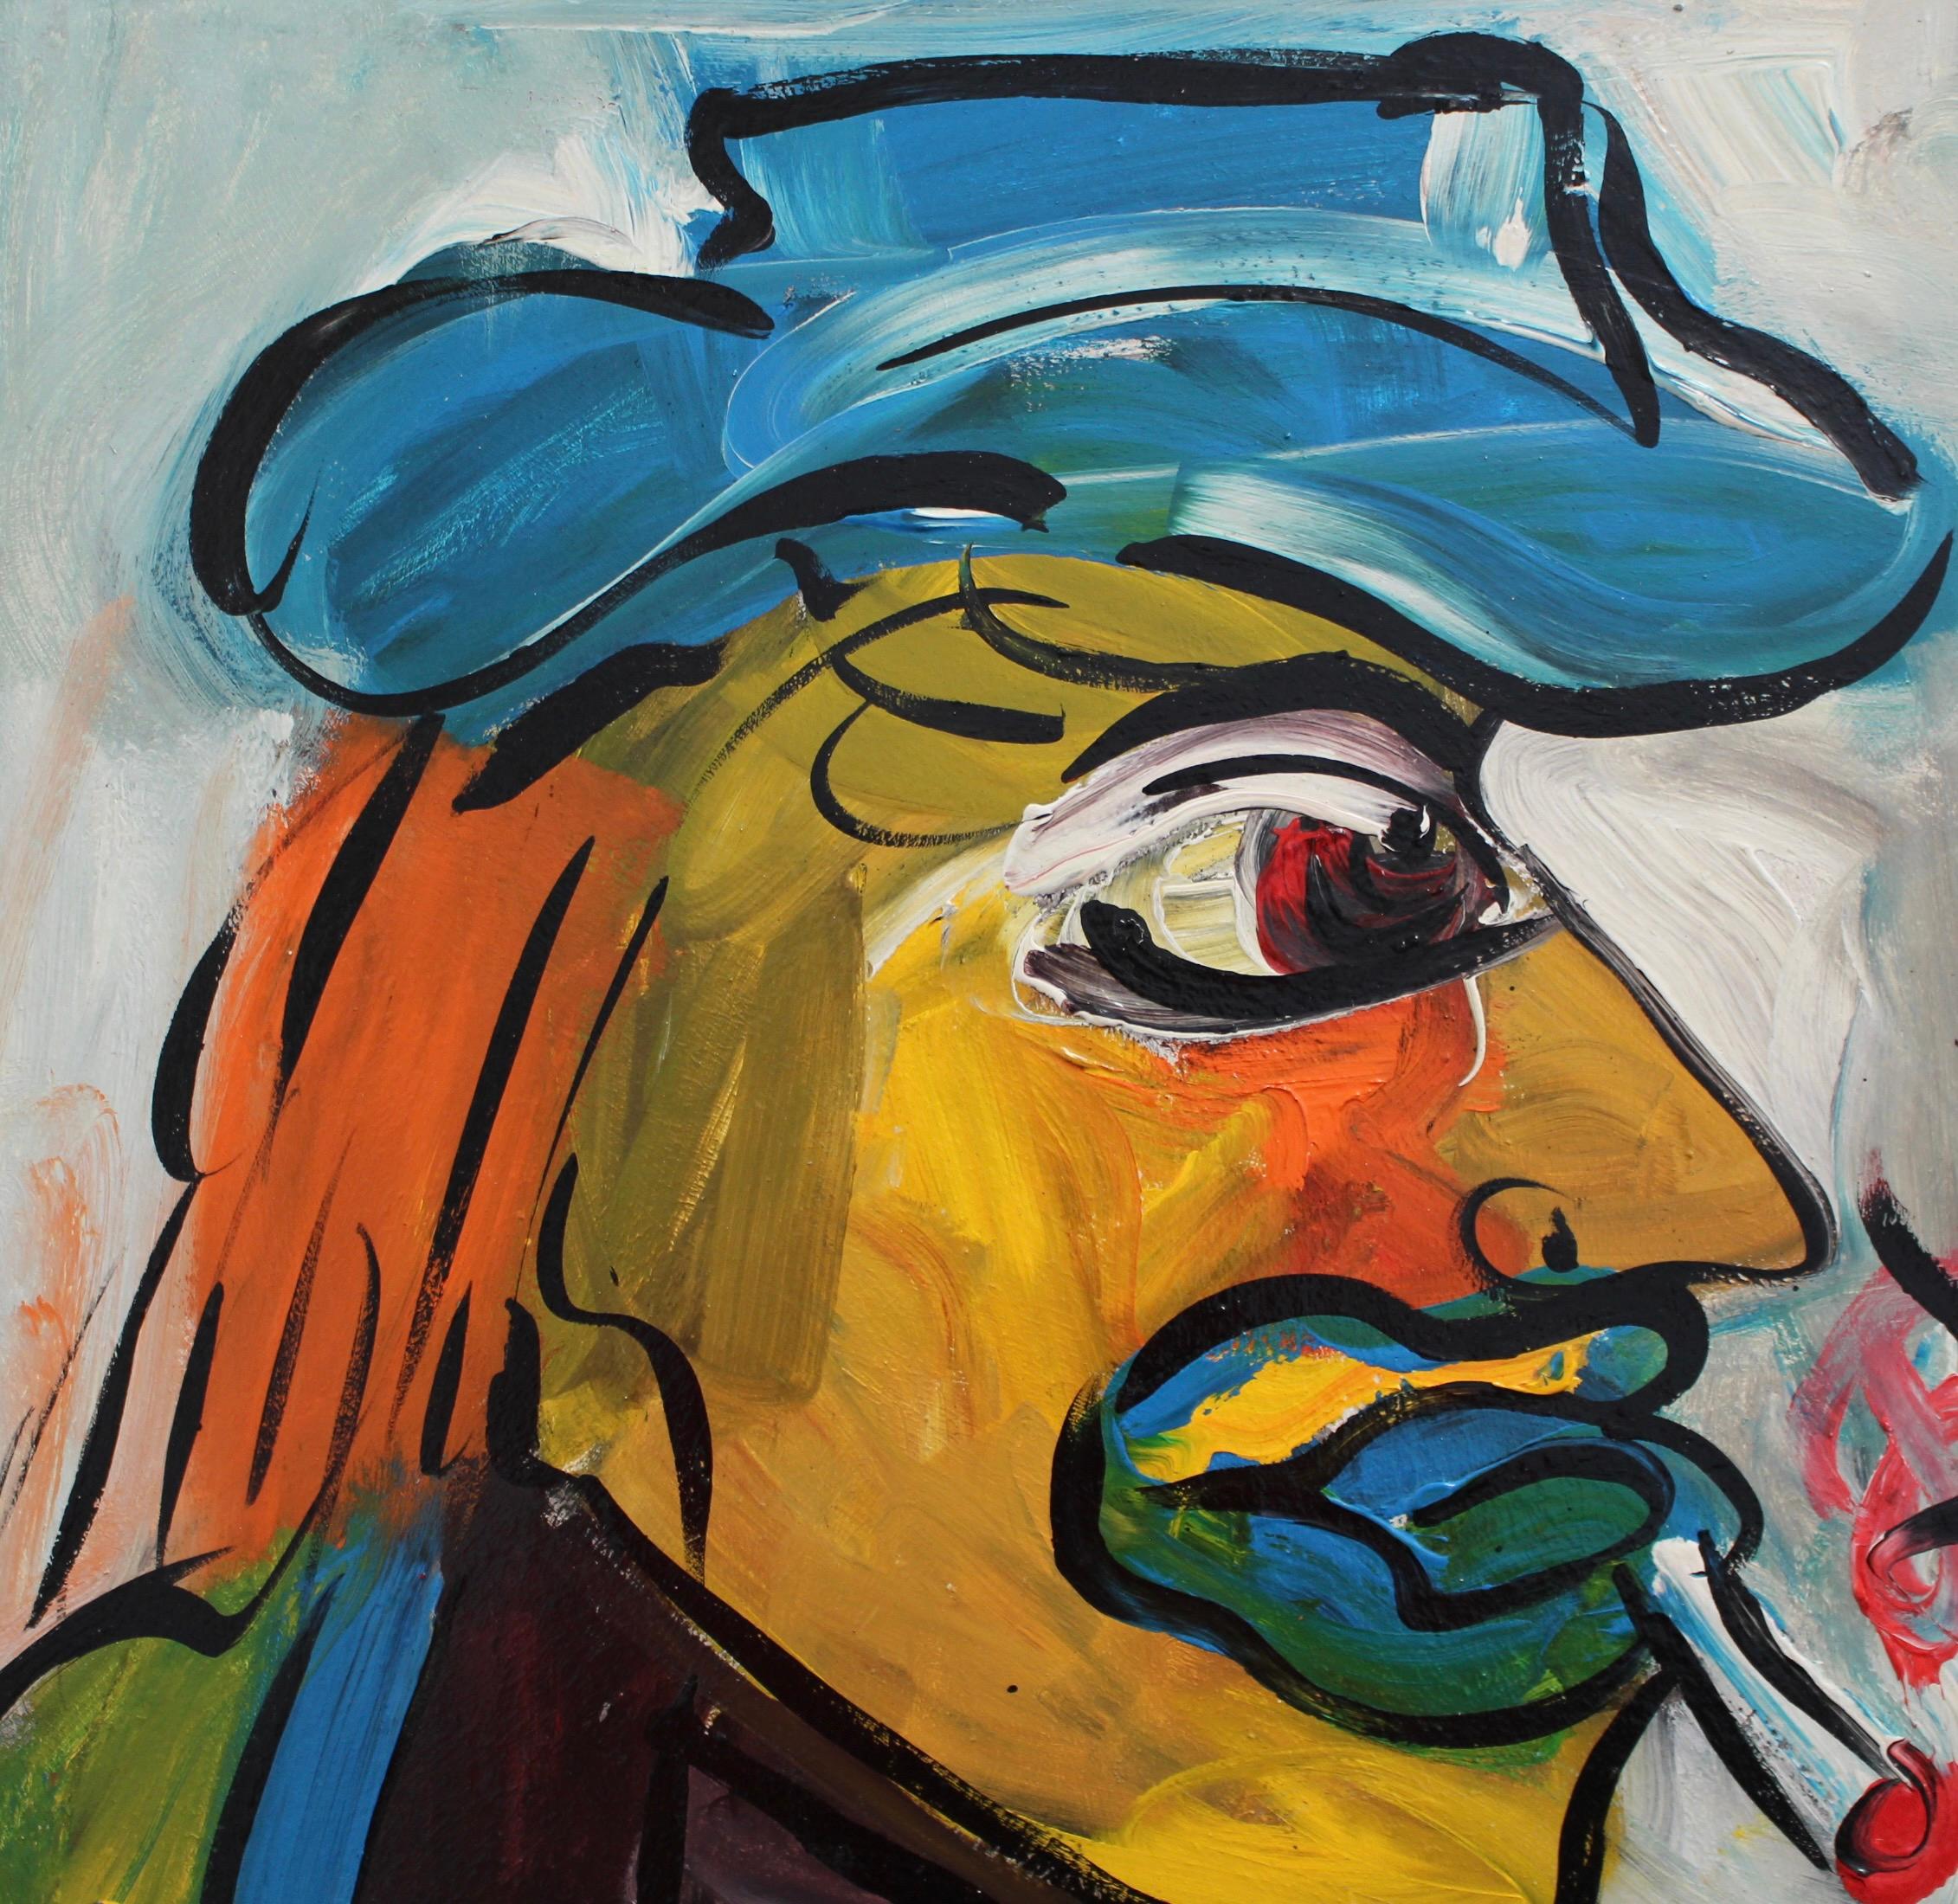 'Man with a Hat', oil on board, by Peter Robert Keil (1983). Big, bold with brash brush strokes painted in exuberant colours is the trademark of the artist. Strangers, friends, acquaintances and imagined characters all appear as subjects in his